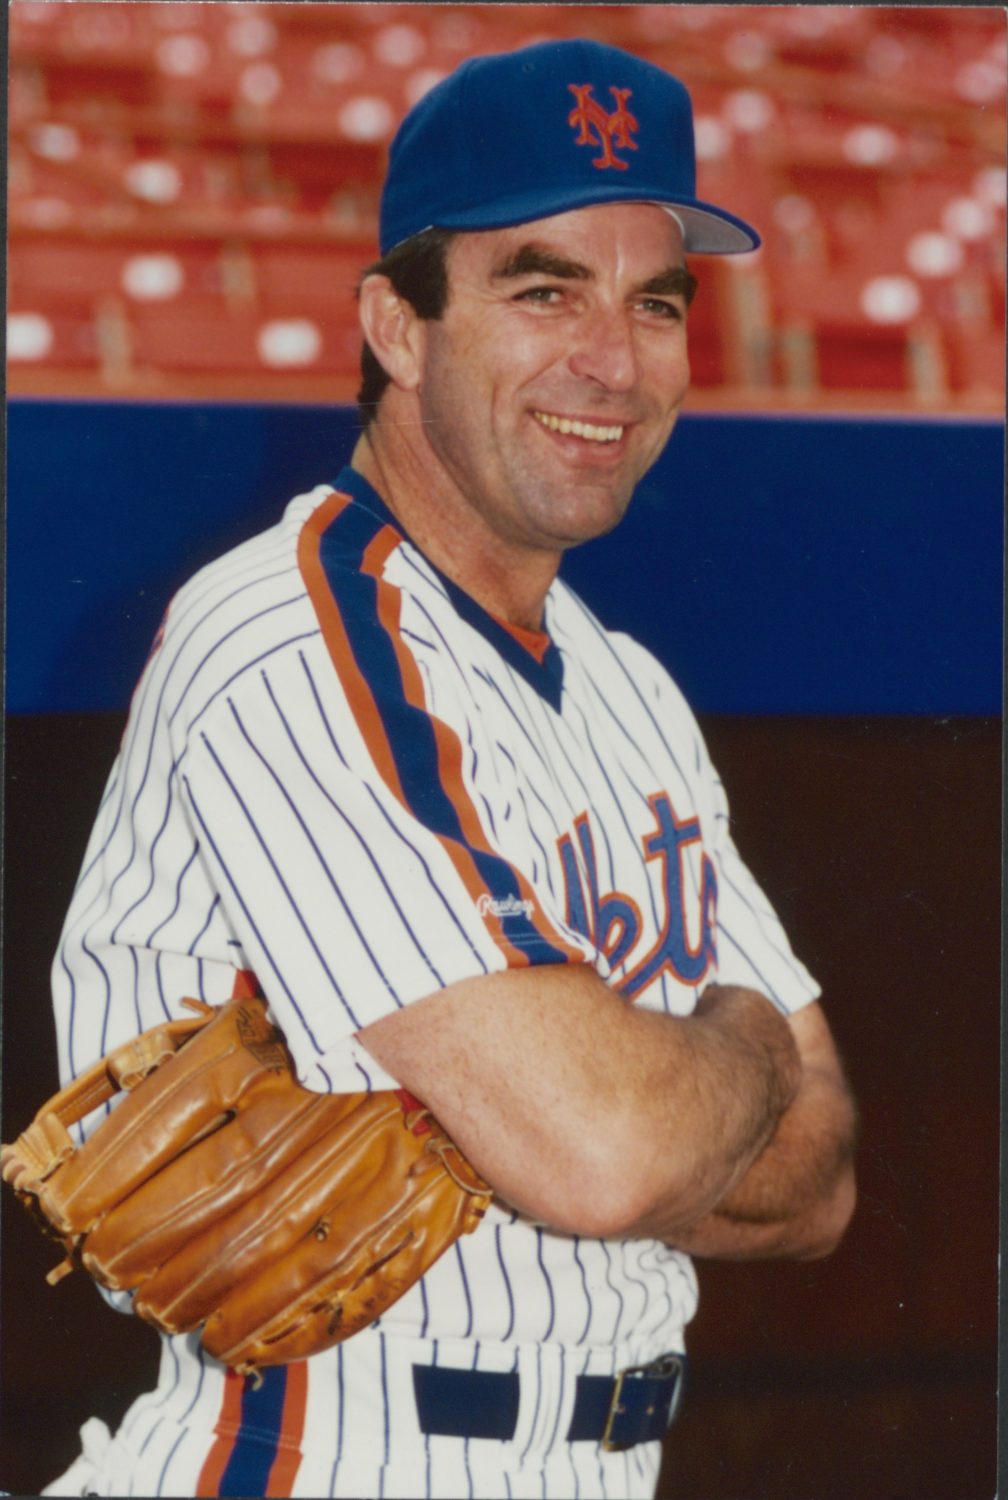 Tom Selleck Suits Up as a New York Met